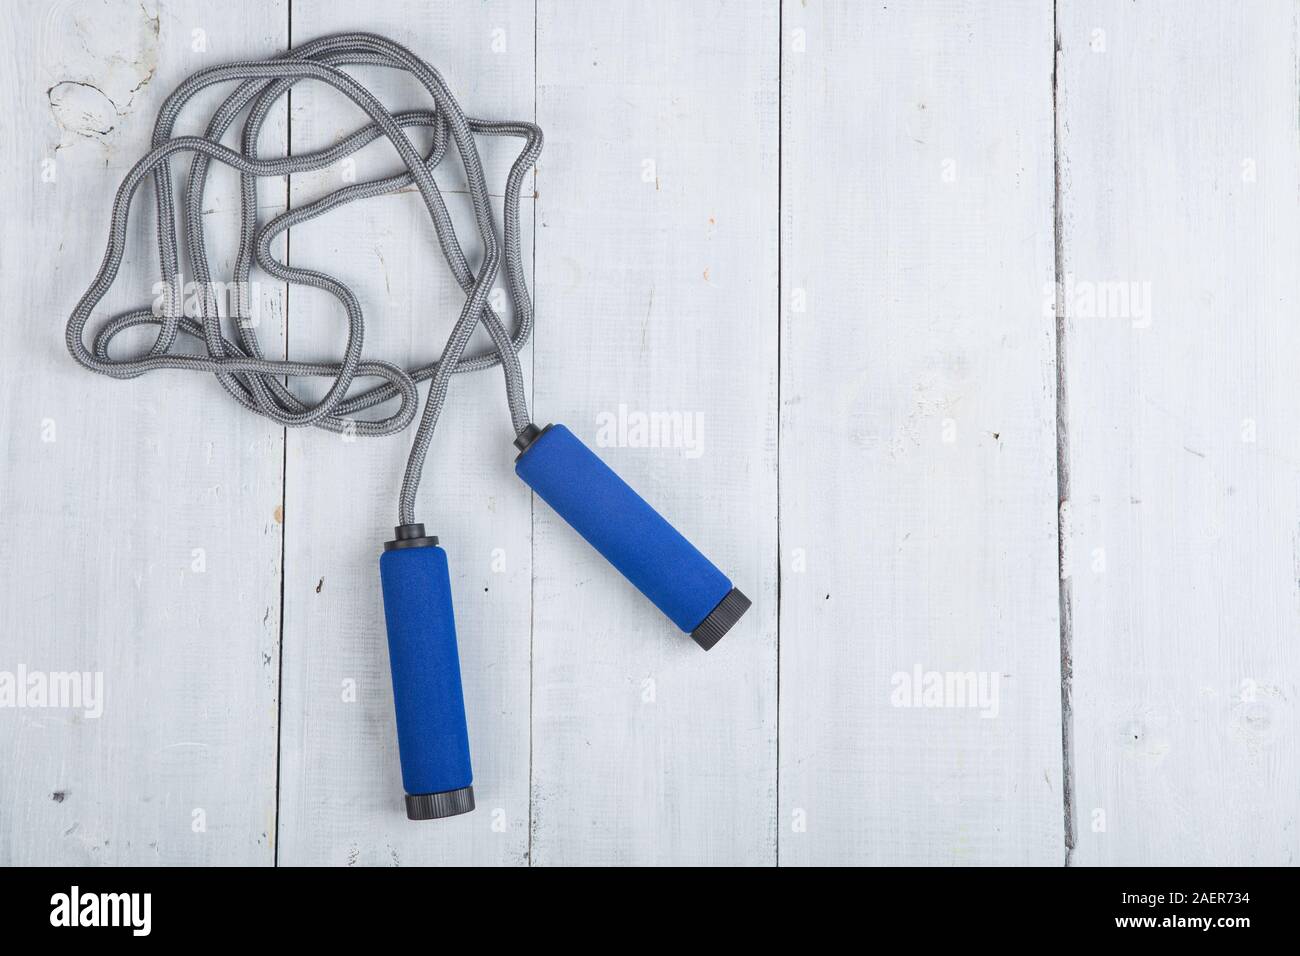 Fitness/sport and healthy lifestyle concept - Jumping/skipping rope with blue handles on white wooden background Stock Photo